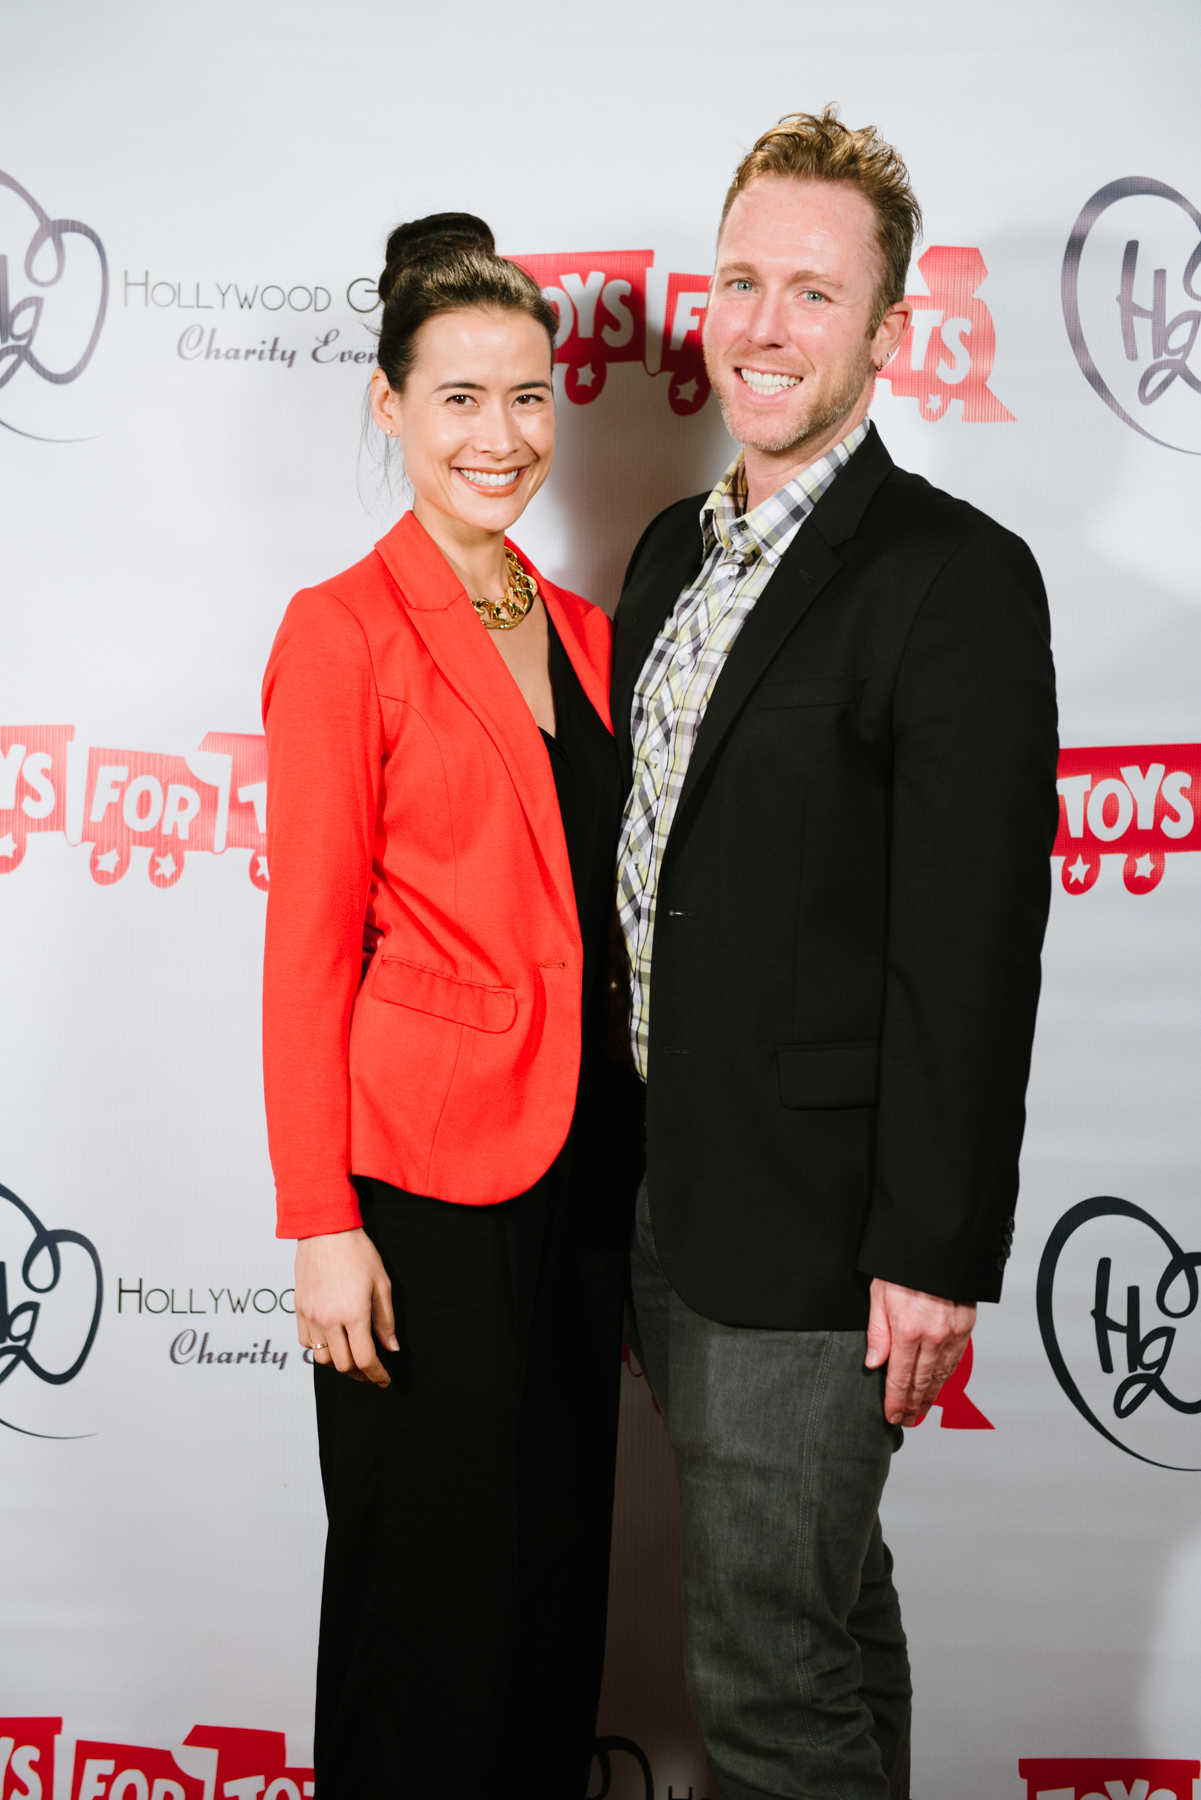 Shi Ne Nielson & Jeff Hall at Toys for Tots Hollywood Gives Charity Event. Dec. 2014